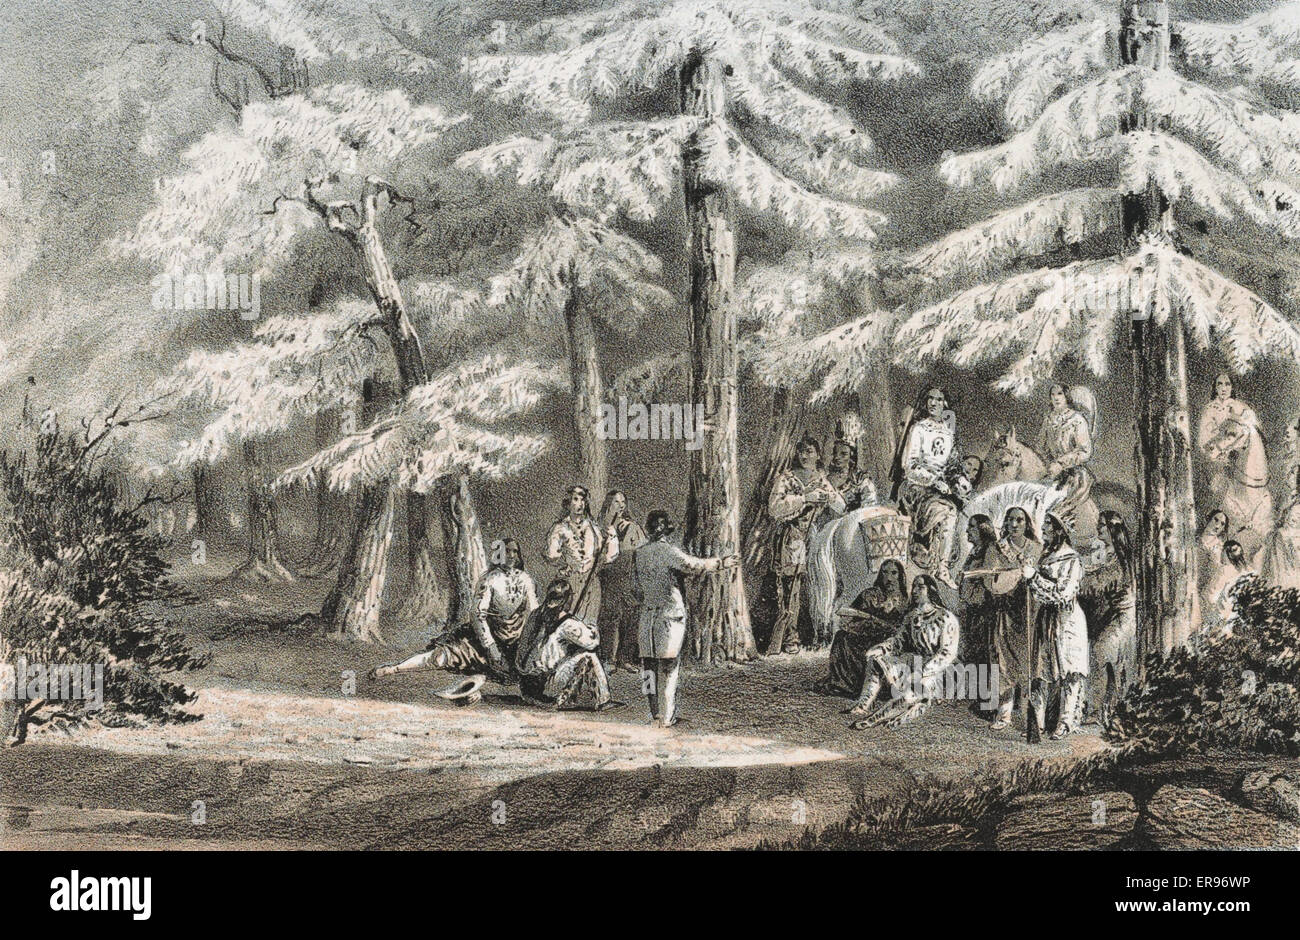 Nez Perces. Print shows a member of the survey expedition, possibly Isaac I. Stevens, meeting with a group of Nez Perce Indians in a heavily wooded area. Date 1860. Published by Major &amp; Knapp Lith. Sarony. Nez Perces. Print shows a member of the surve Stock Photo